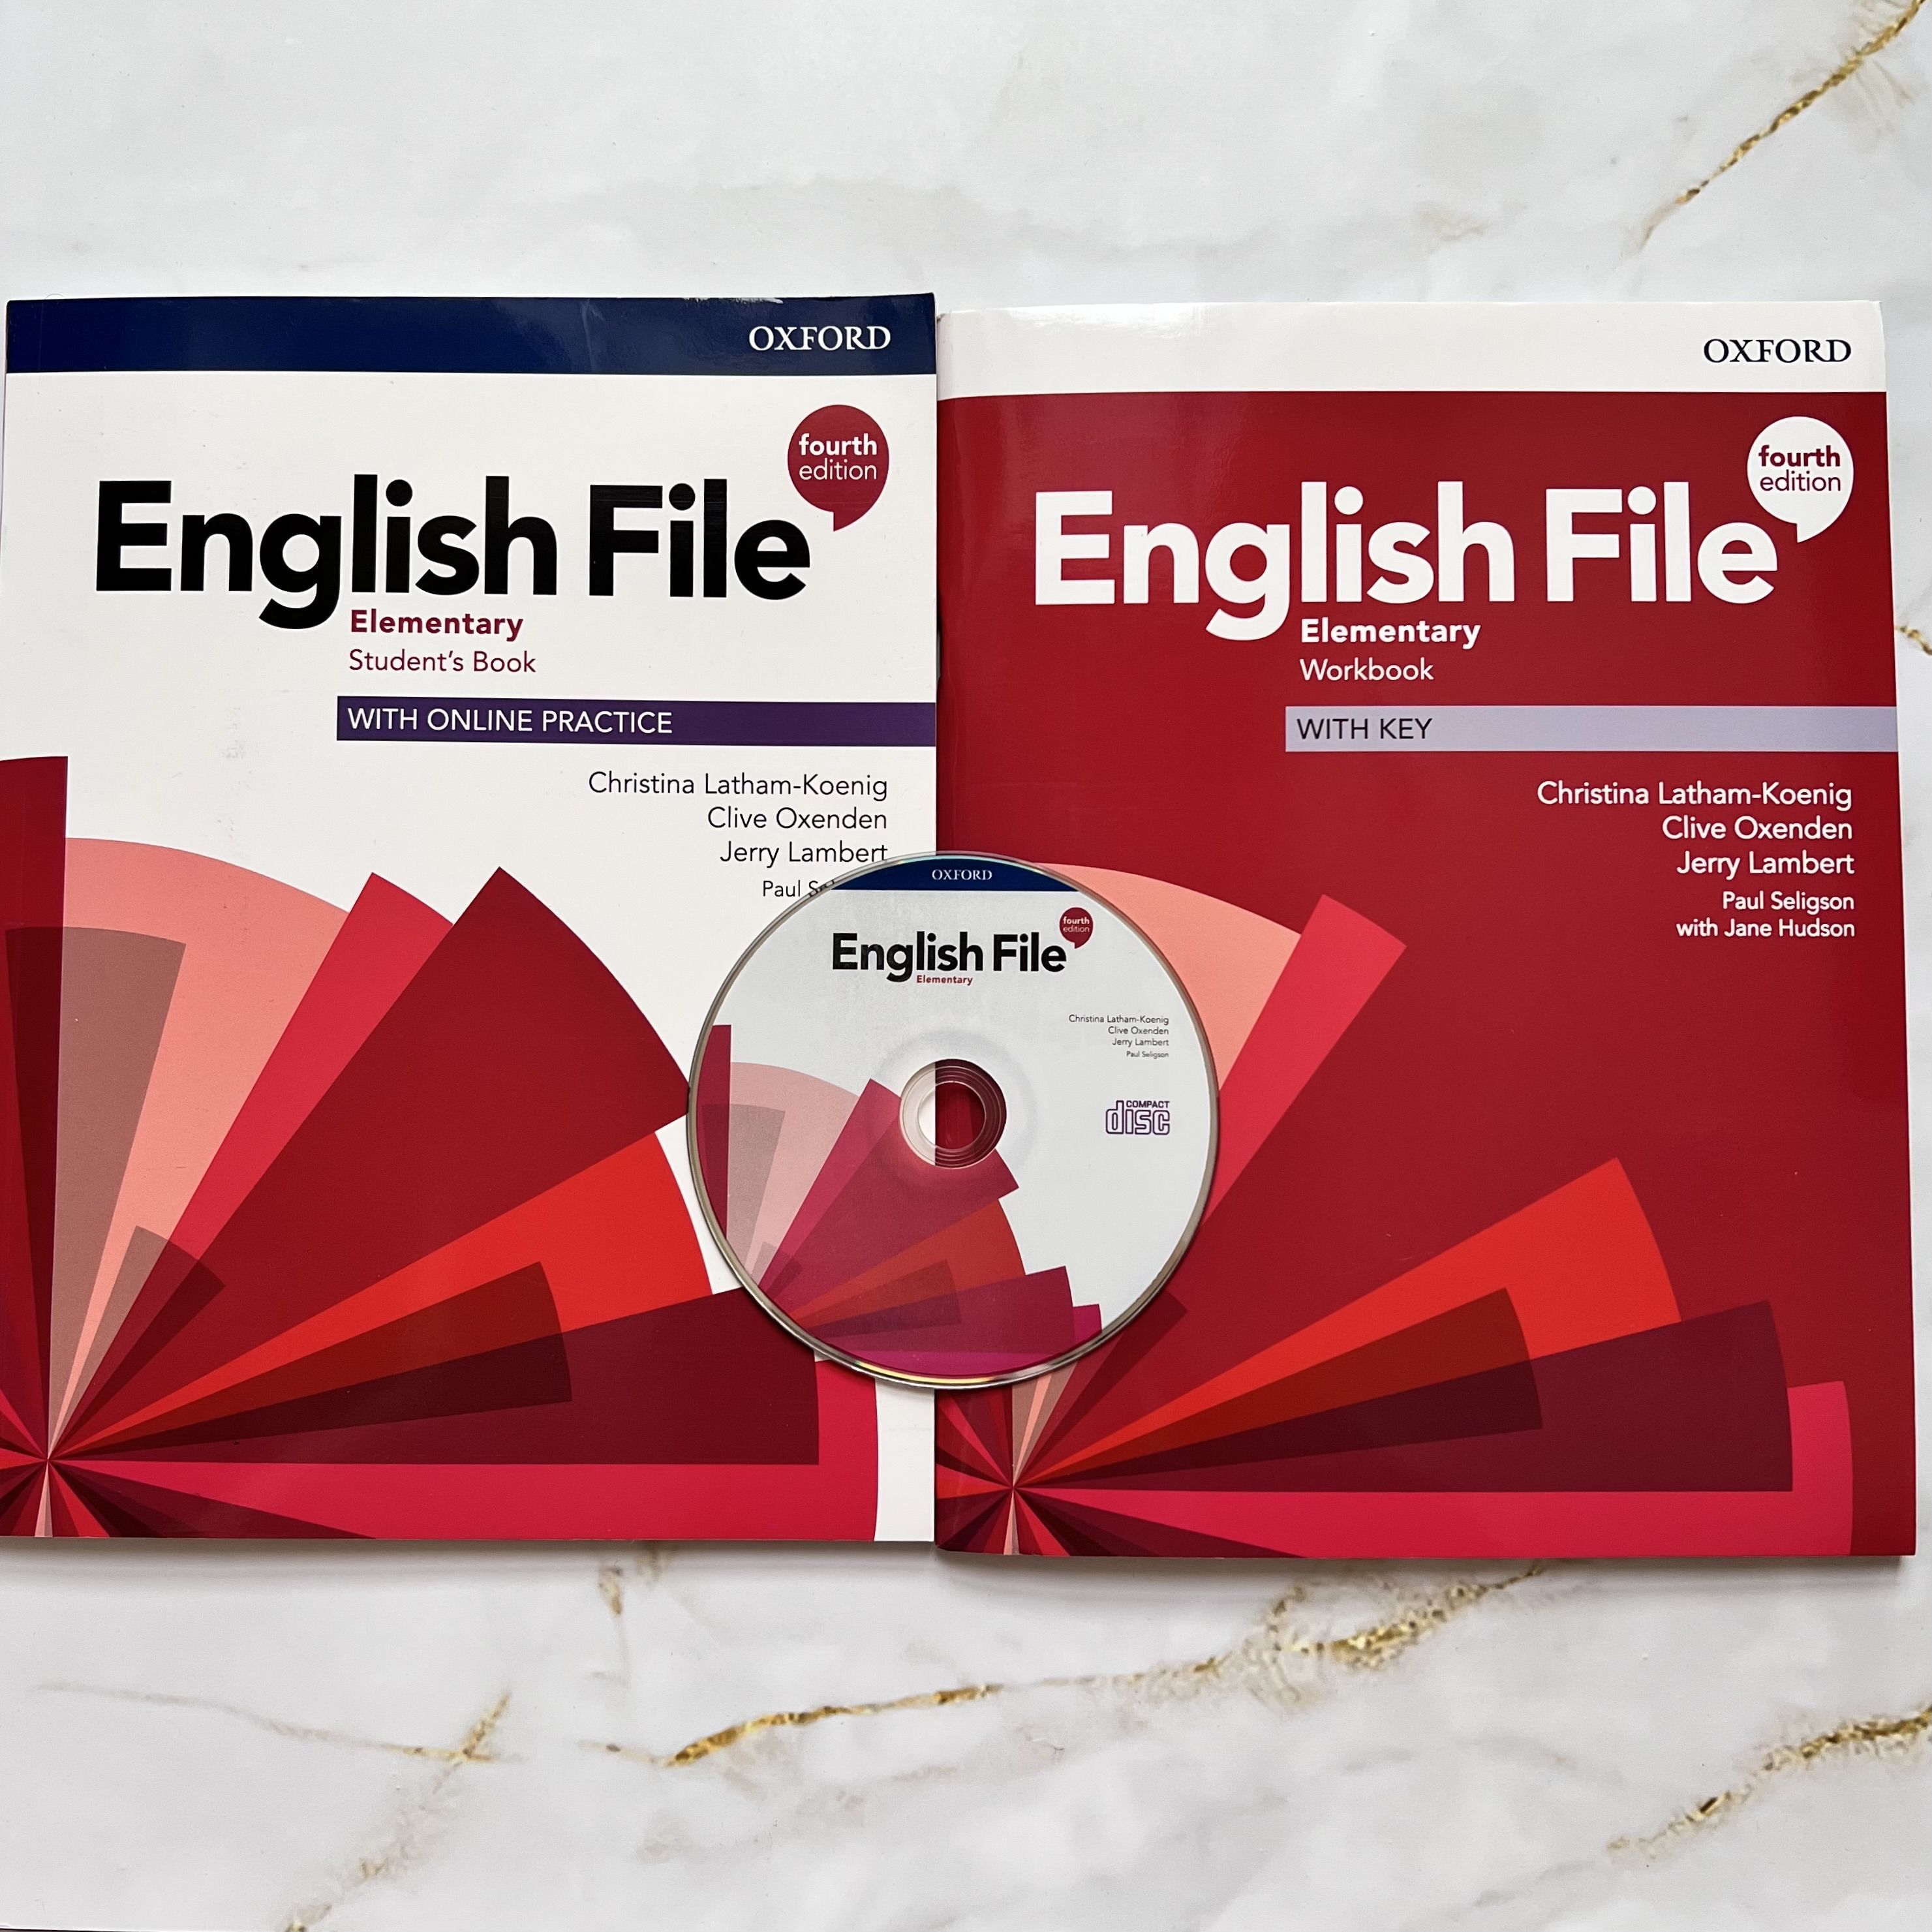 English file Elementary 4th Edition уровень. English file Elementary 4th. Учебник английского элементари Оксфорд. English file Elementary 4th Edition.